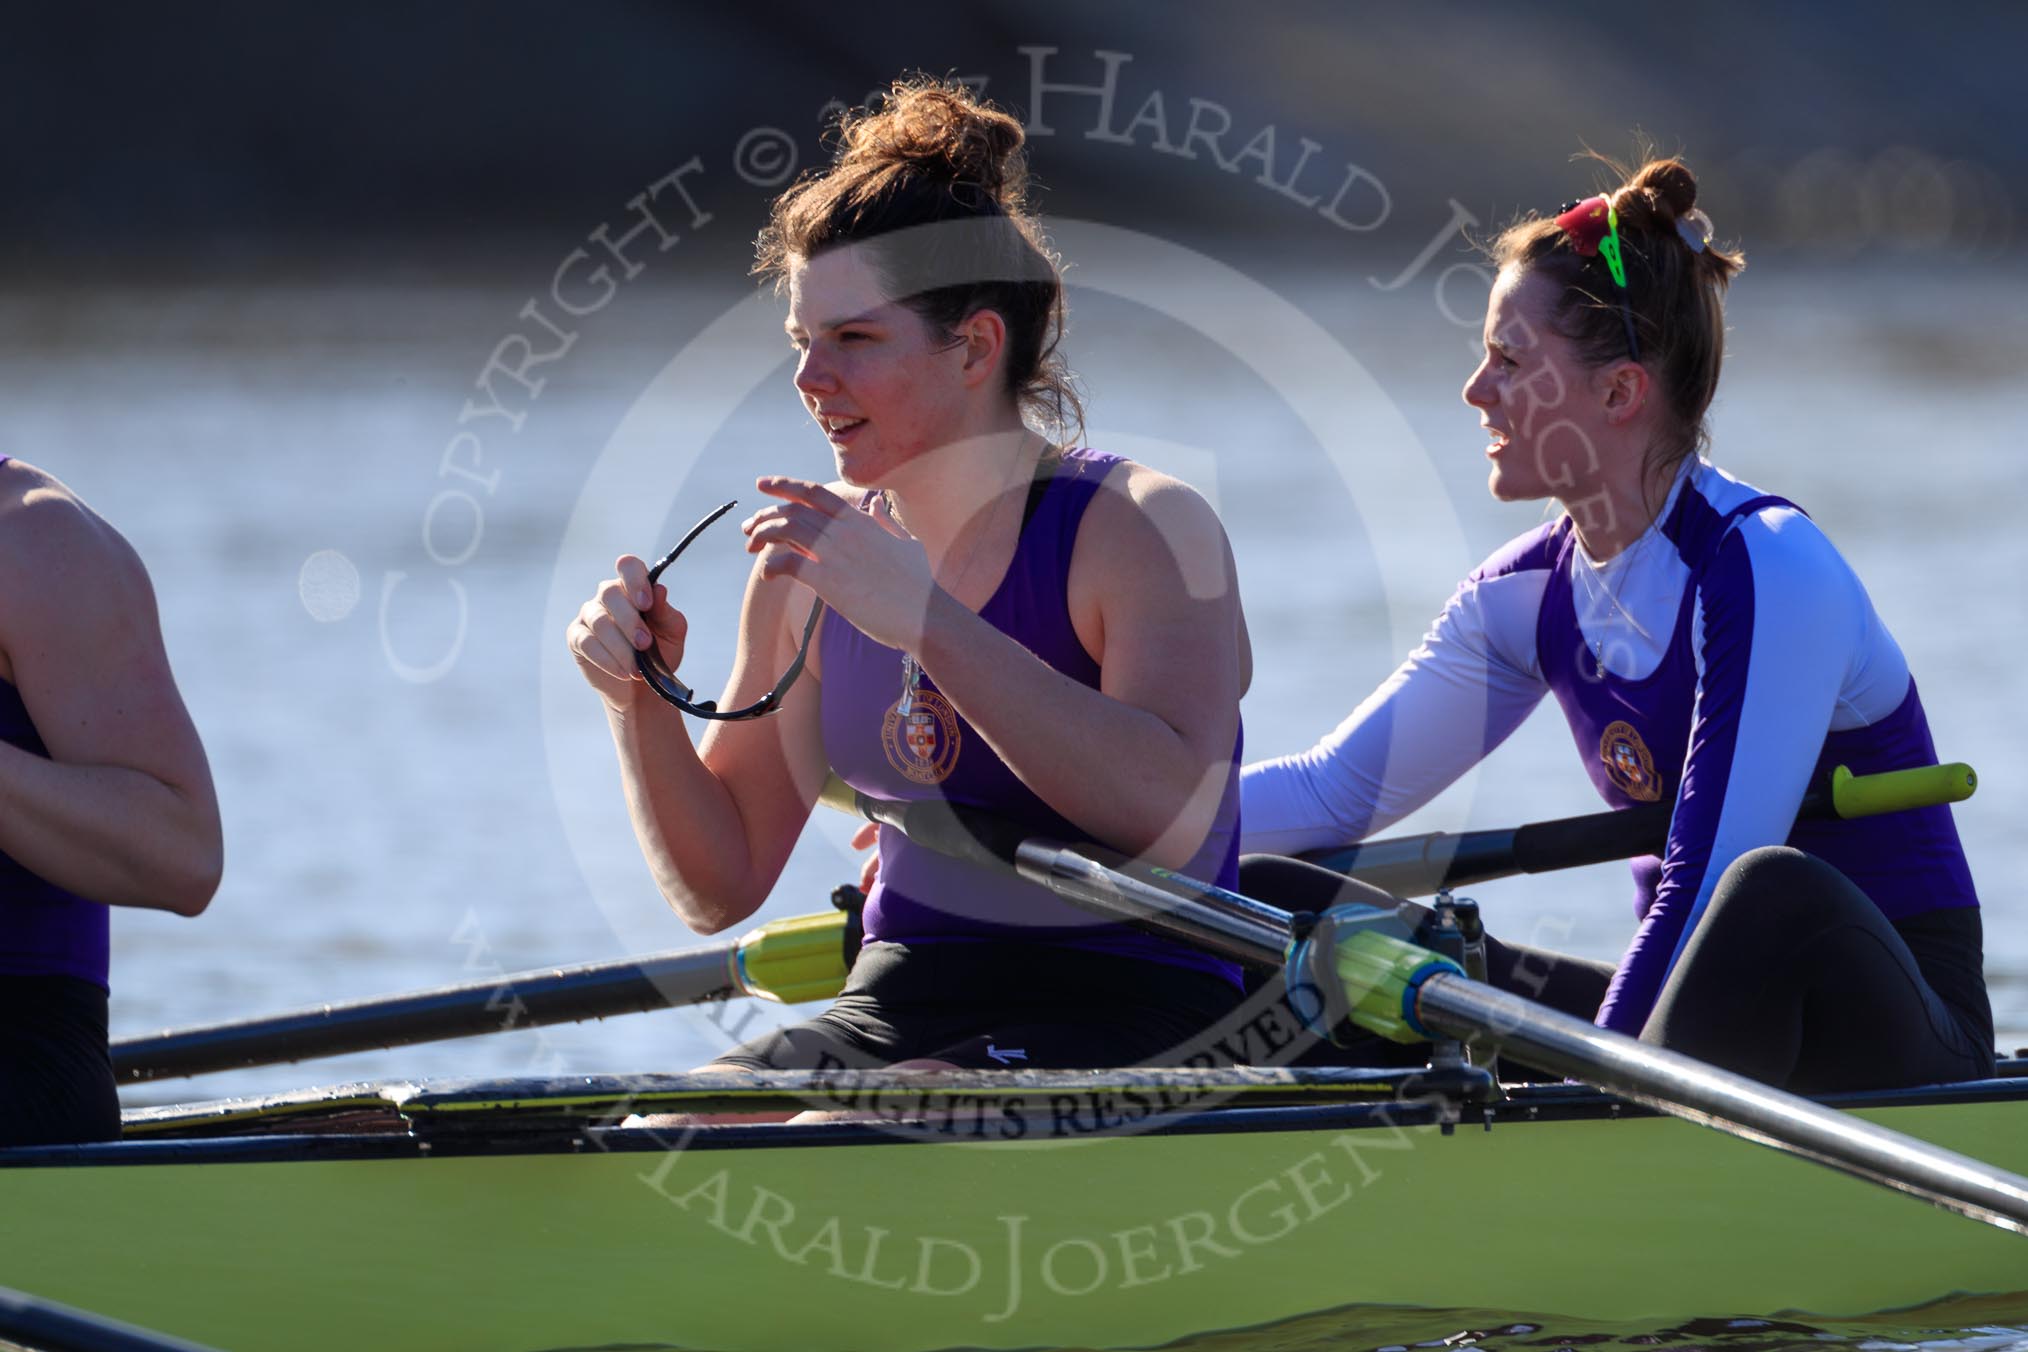 The Women's Boat Race season 2018 - fixture CUWBC vs. ULBC: ULBC 3 Fionnuala Gannon and 2 Robyn Hart-Winks resting after the first part of the race.
River Thames between Putney Bridge and Mortlake,
London SW15,

United Kingdom,
on 17 February 2018 at 13:20, image #97